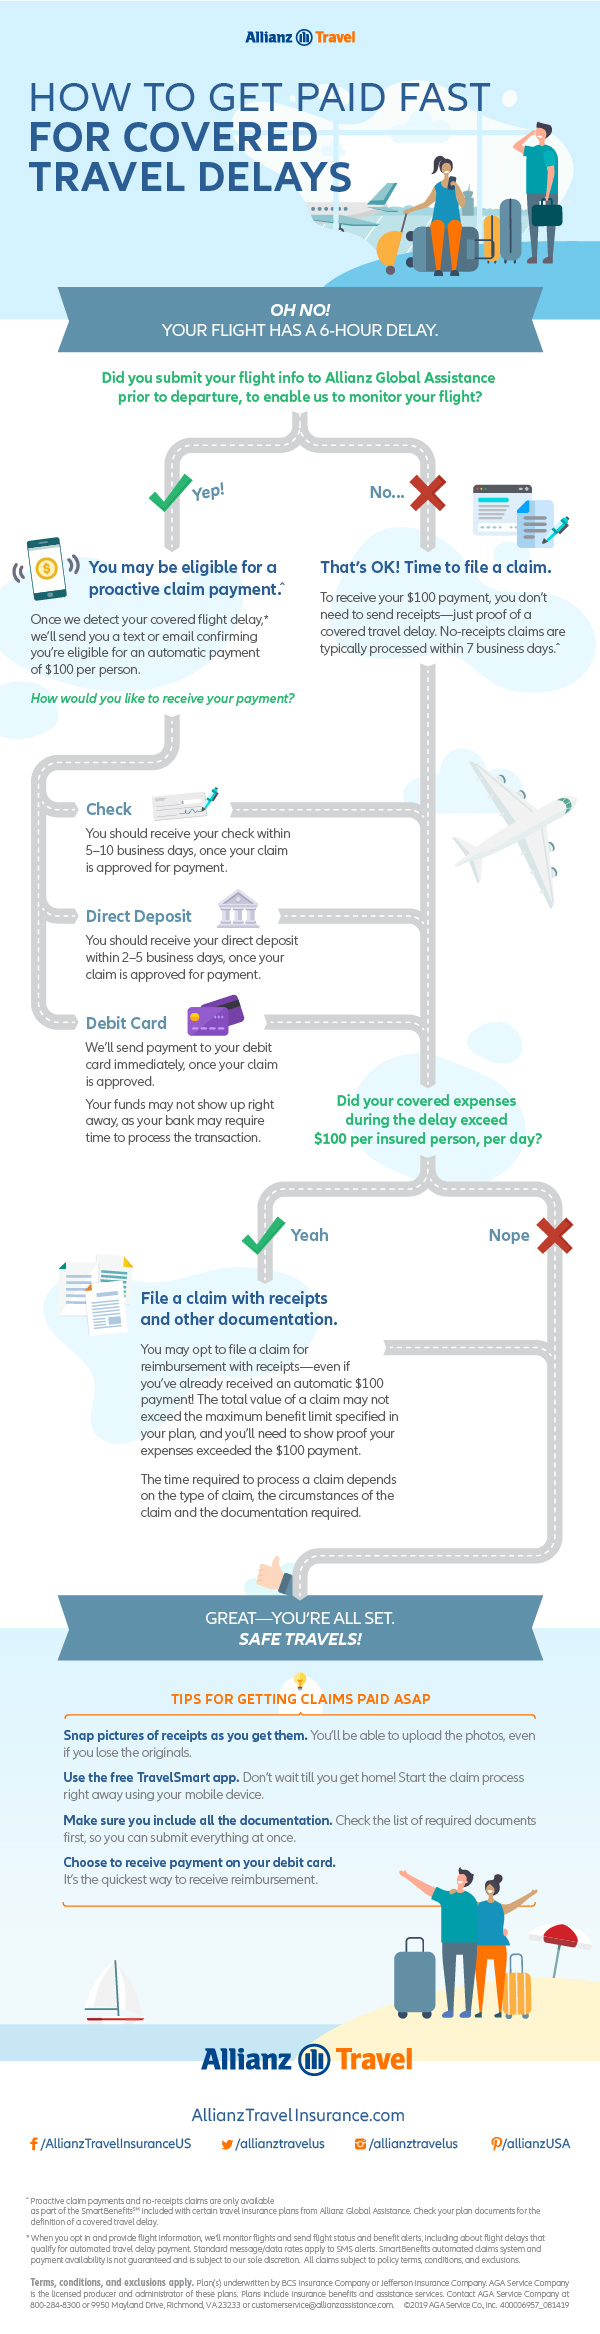 Allianz - Infographic: How SmartBenefits℠ Can Speed Up Claim Payments